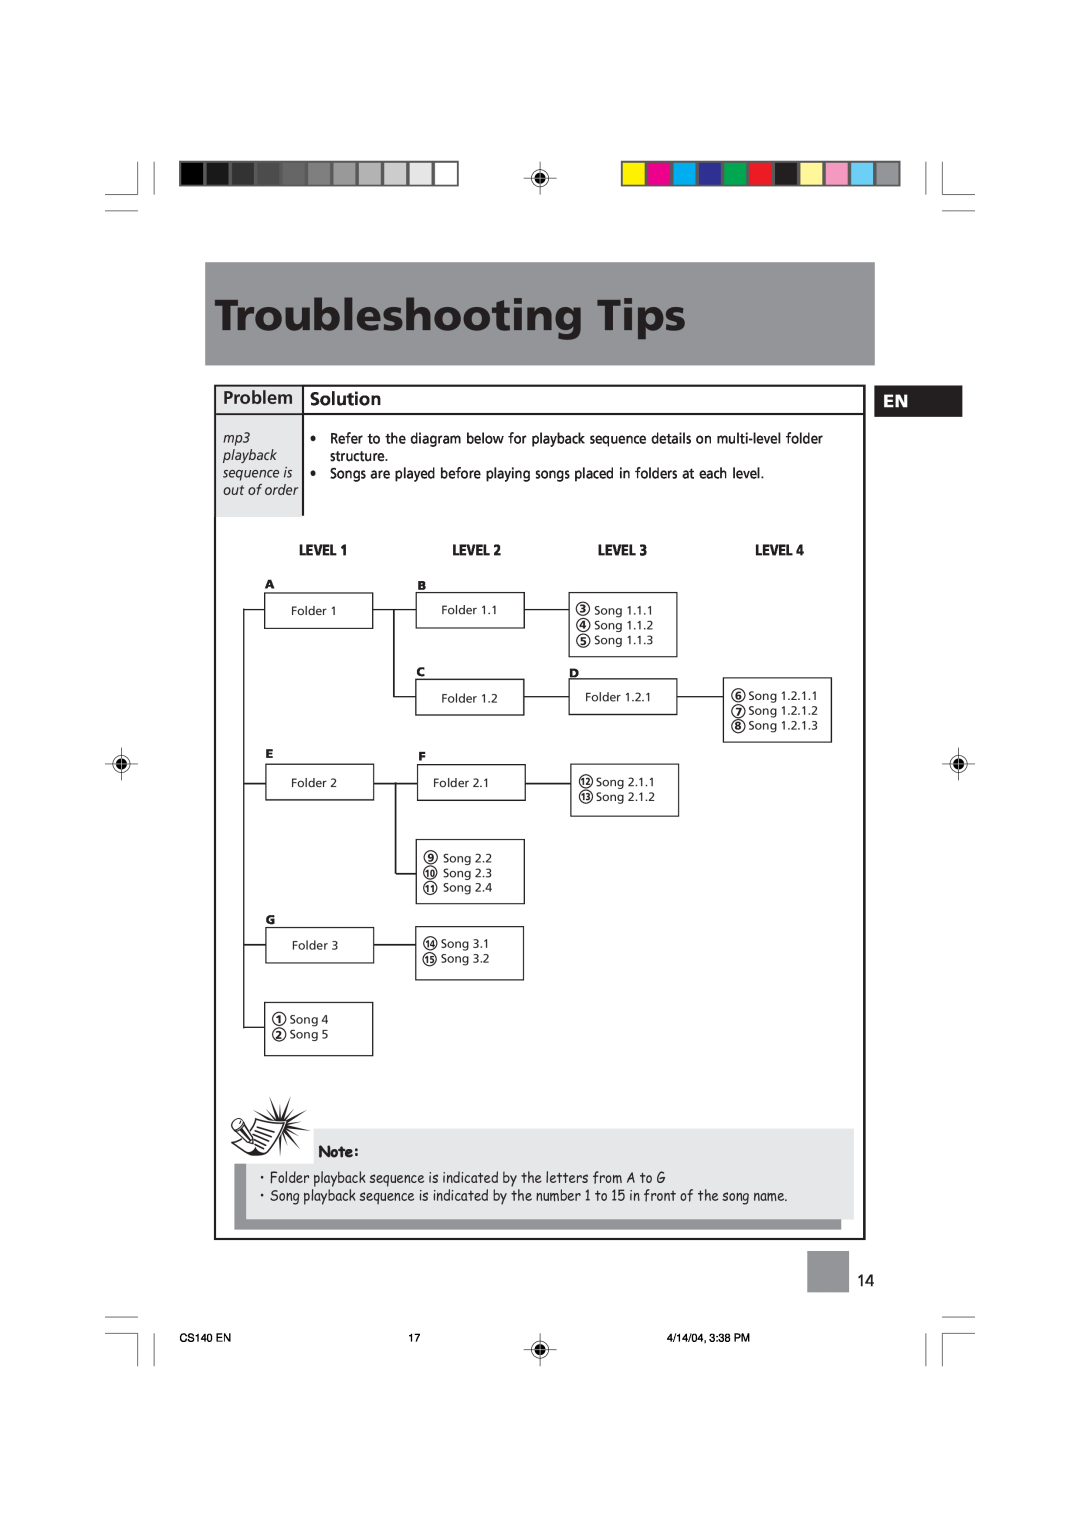 Technicolor - Thomson CS140 user service Troubleshooting Tips, Problem, Solution, playback, structure, out of order, Level 